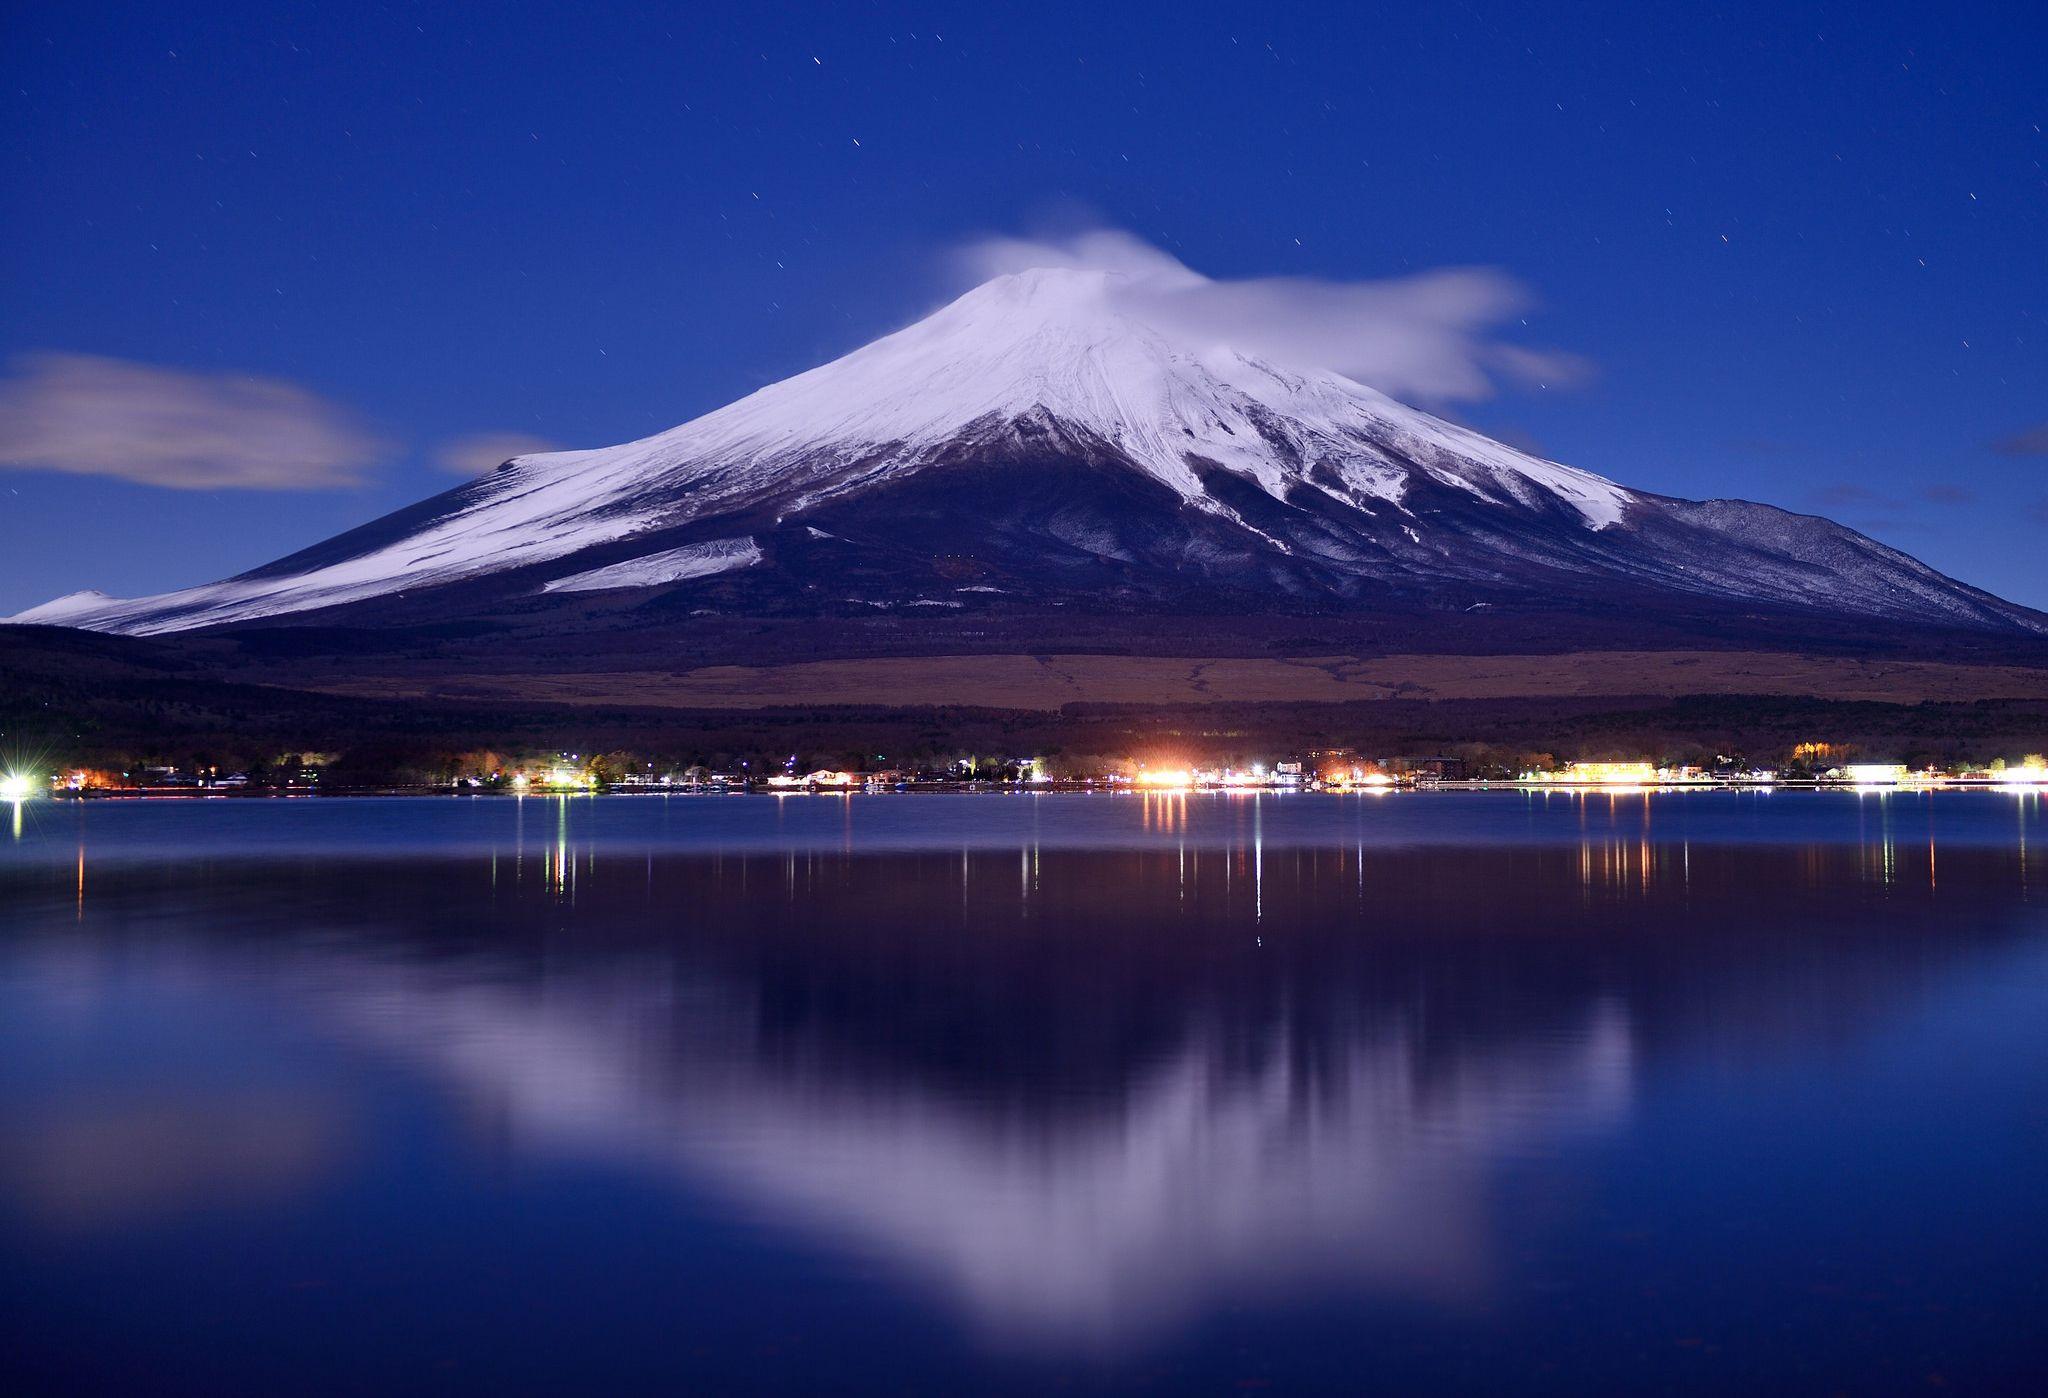 awesome A Night View Of Mount Fuji In Japan. AmazingPict